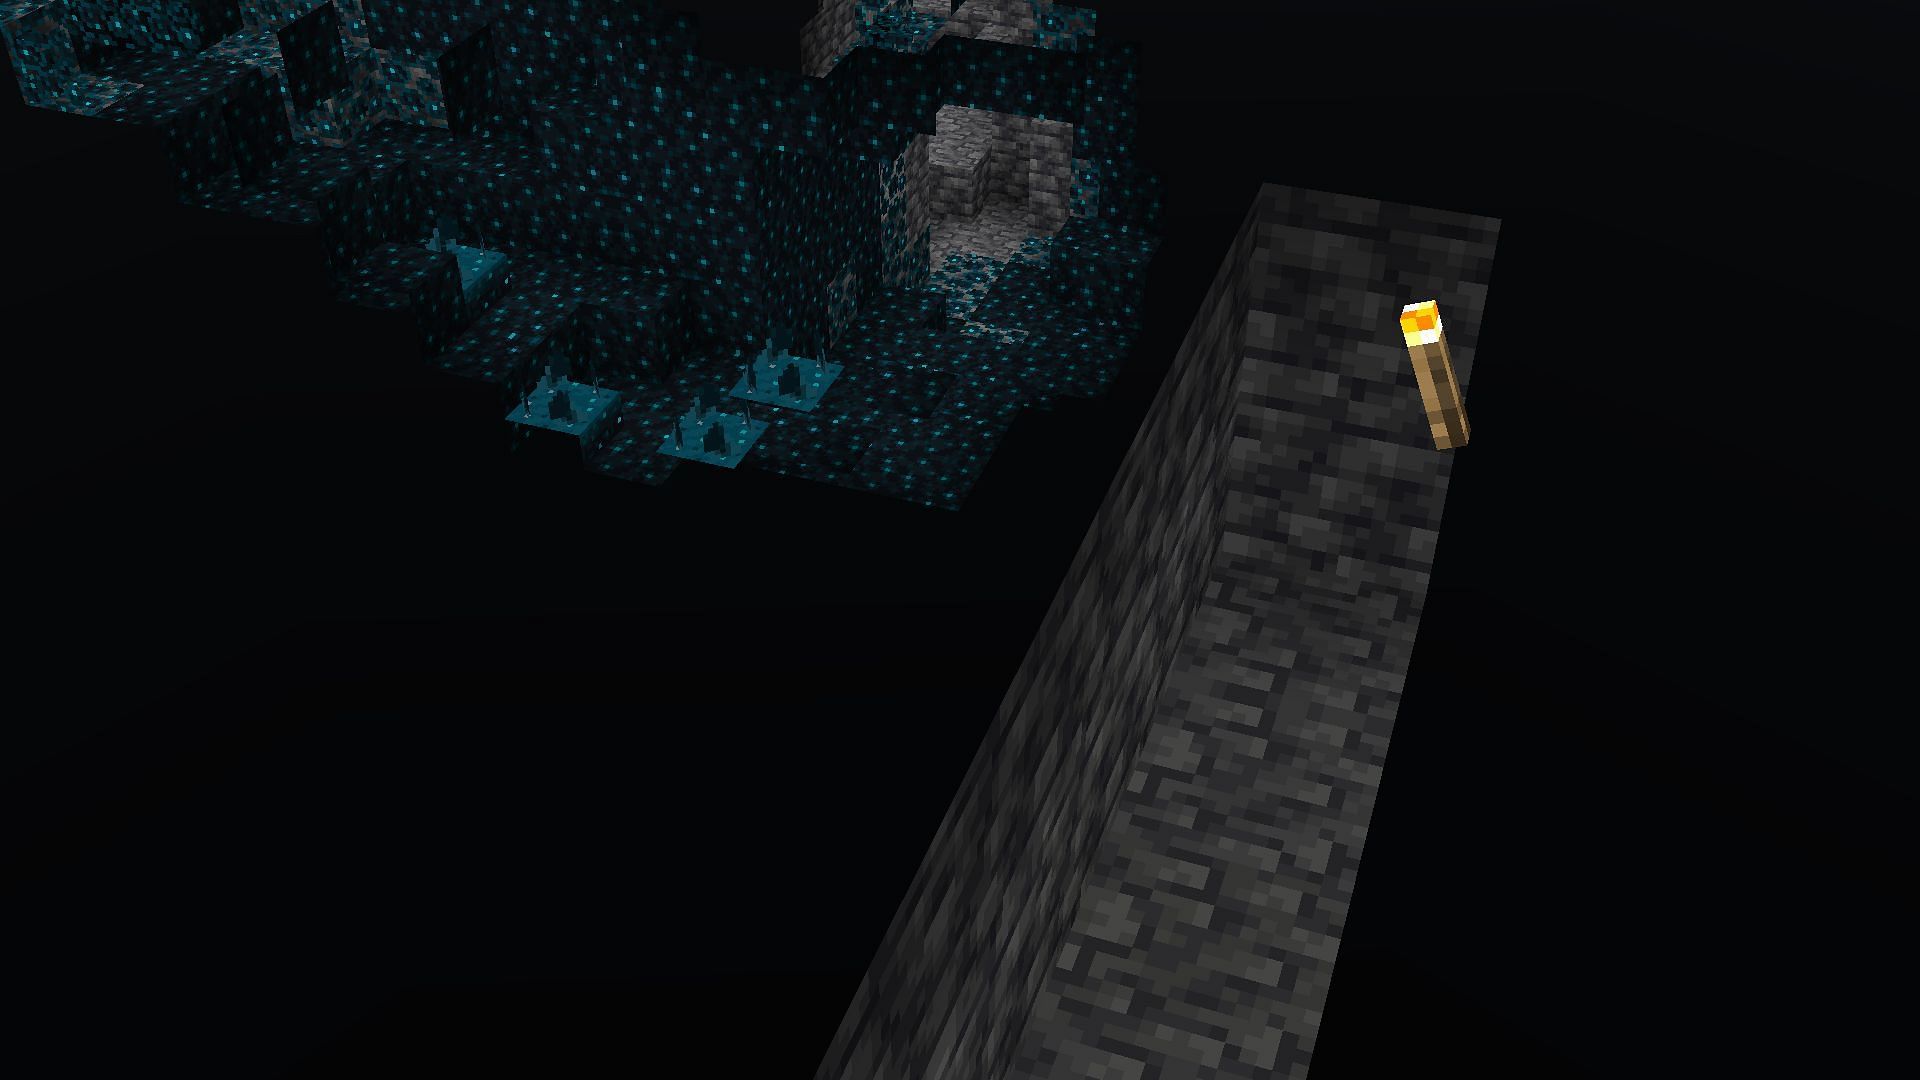 Players must avoid the Deep Dark biomes as much as possible (Image via Mojang)